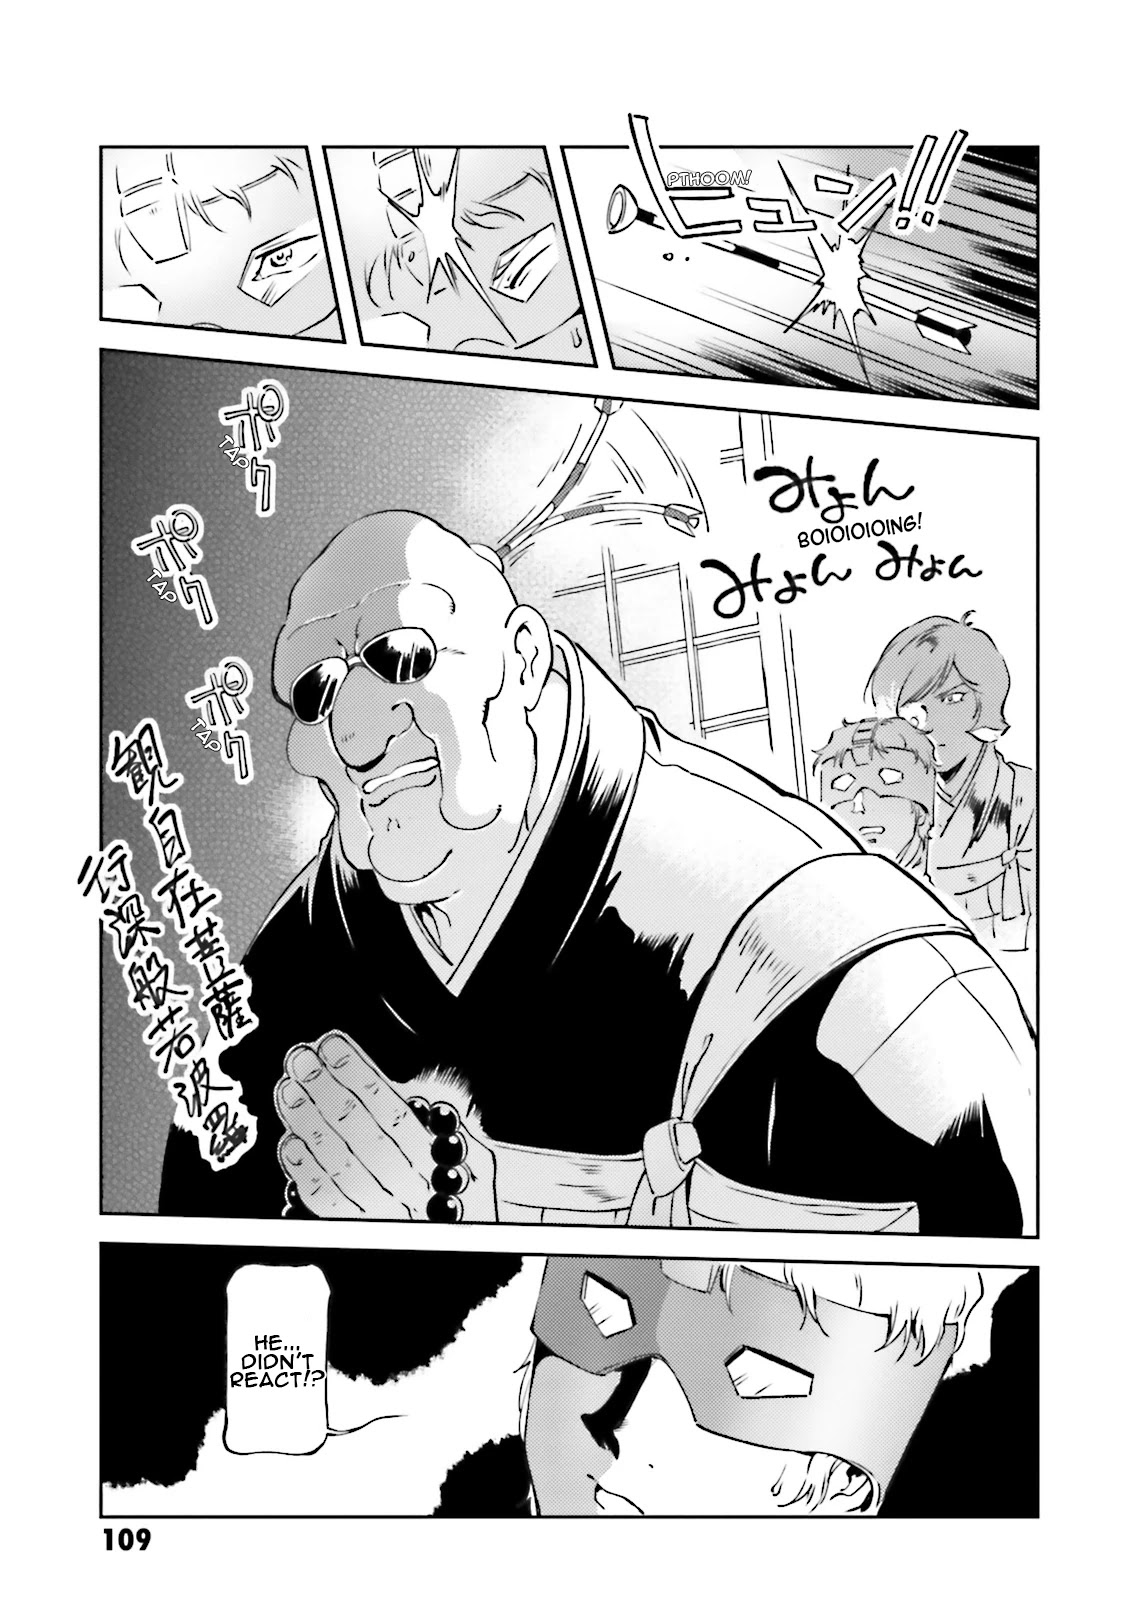 Char's Daily Life - Page 3